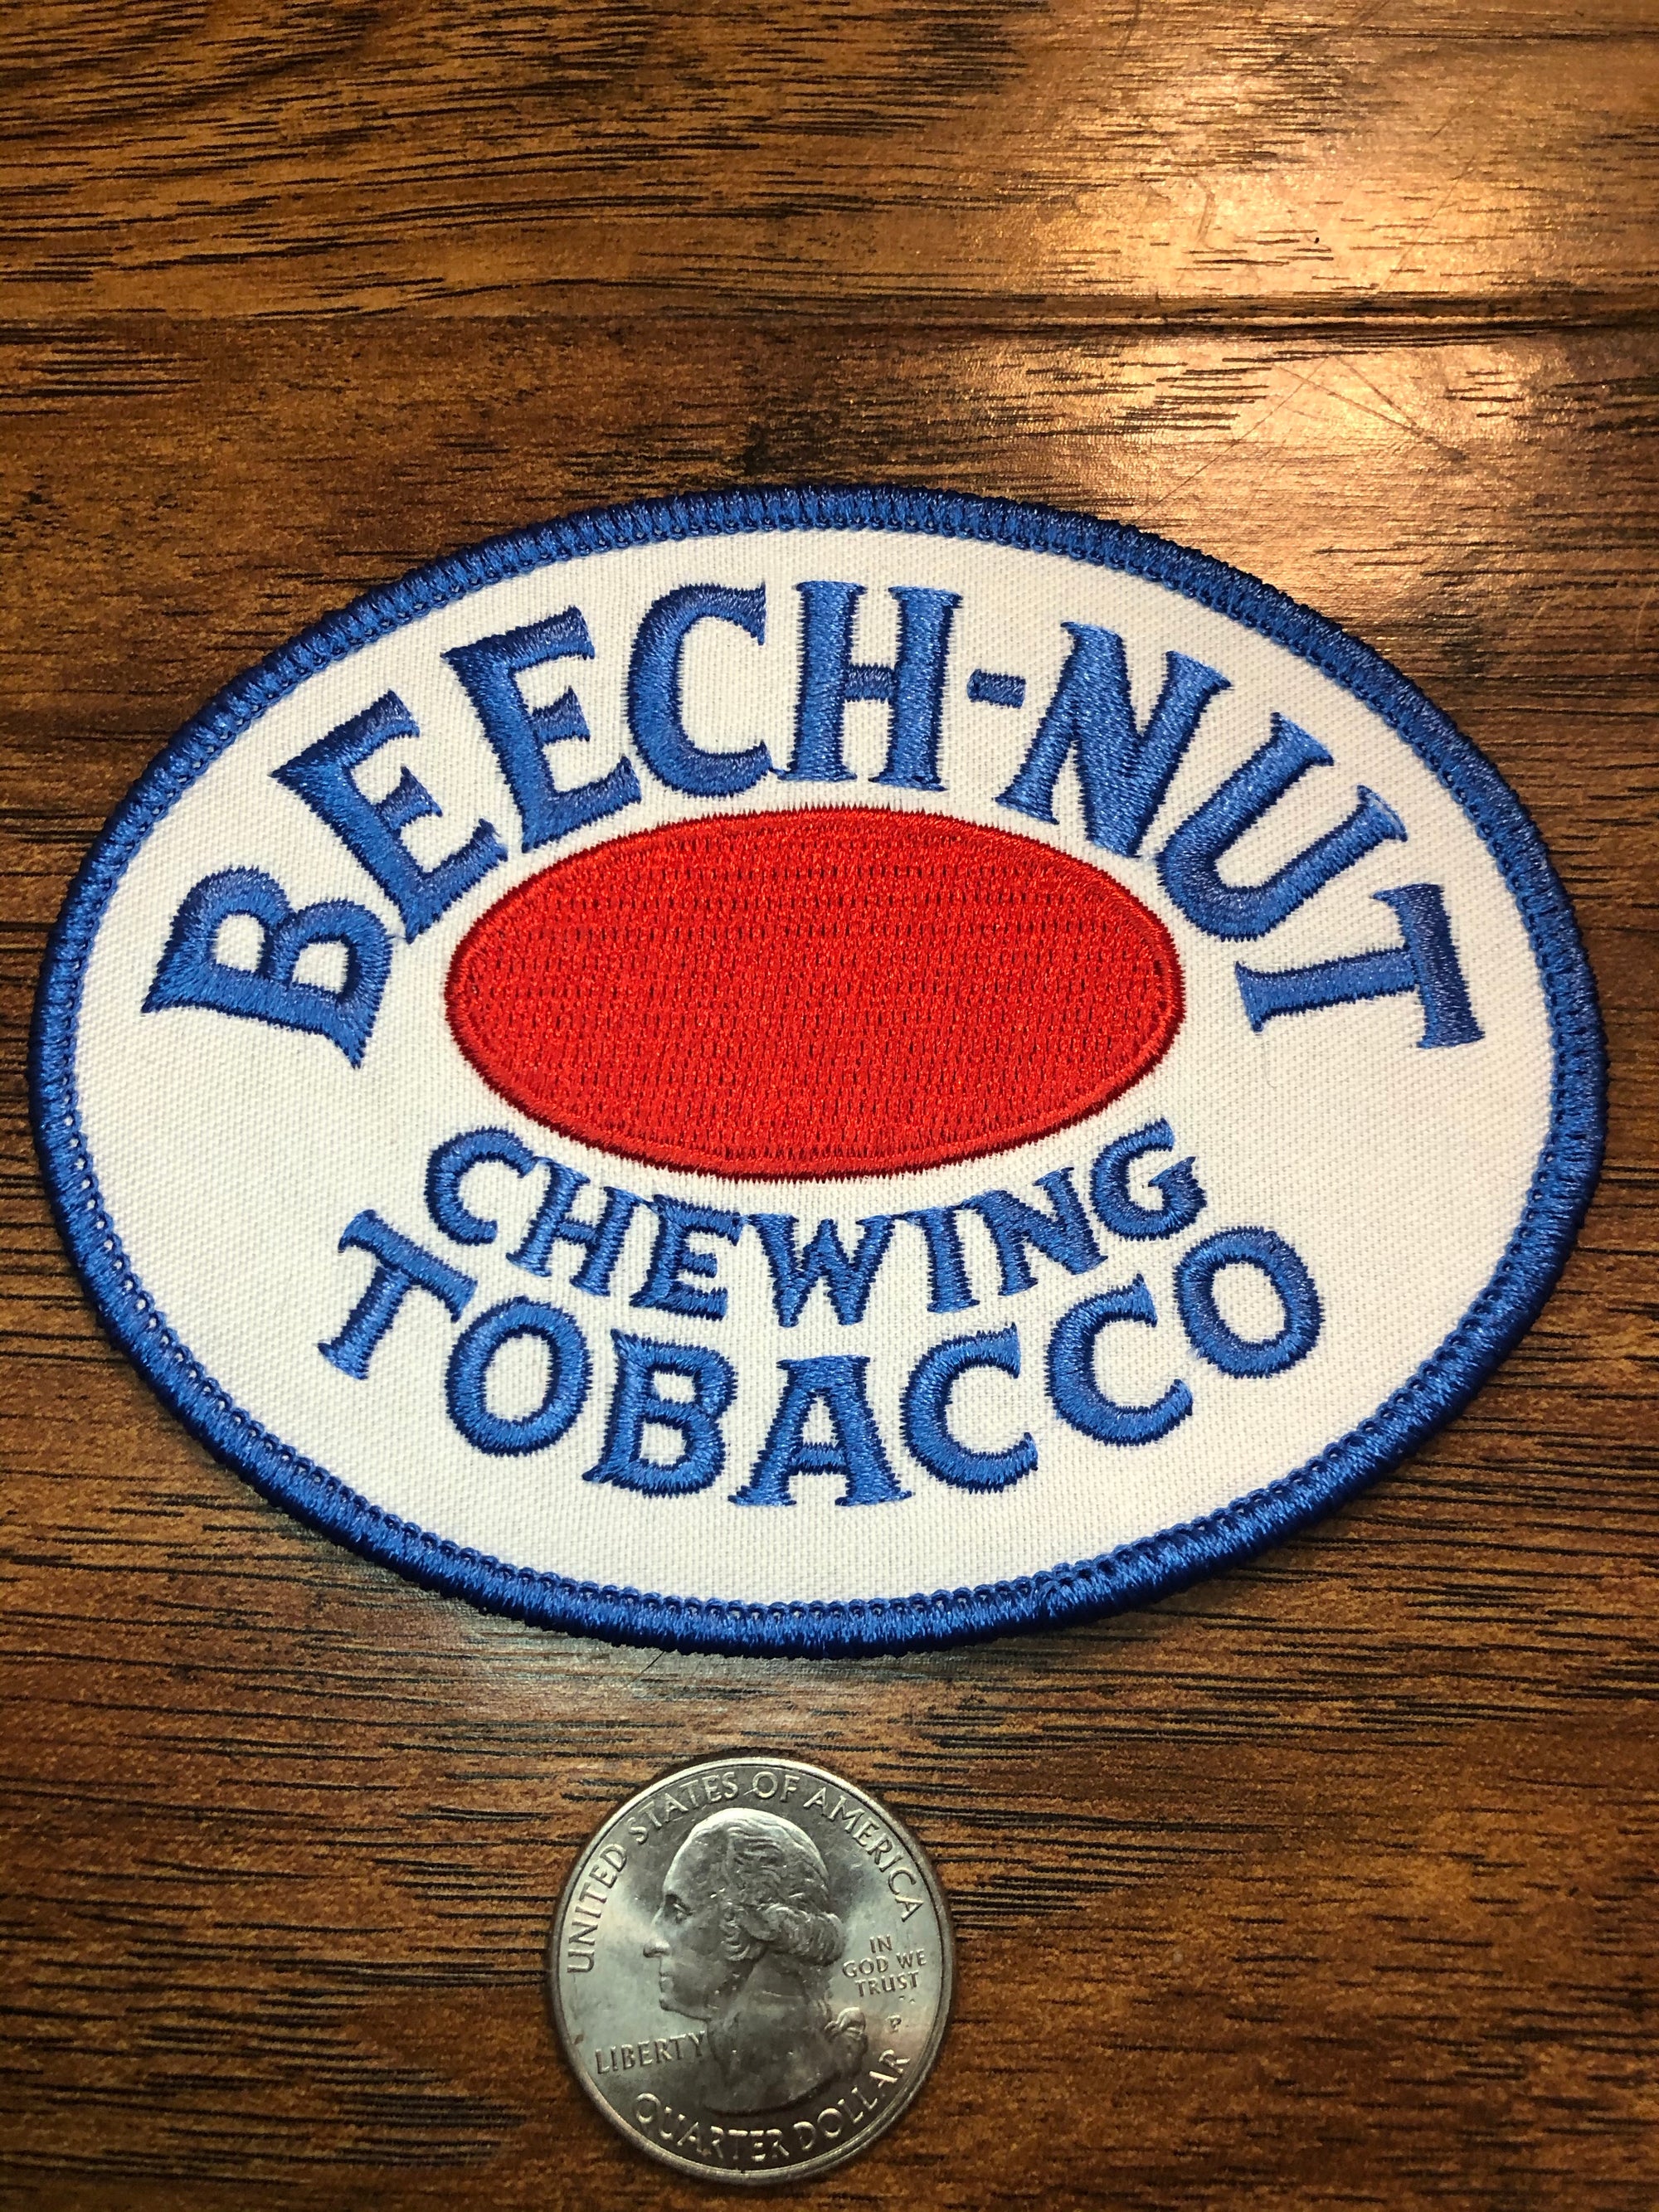 Beech-Nut Chewing Tobacco, Dip